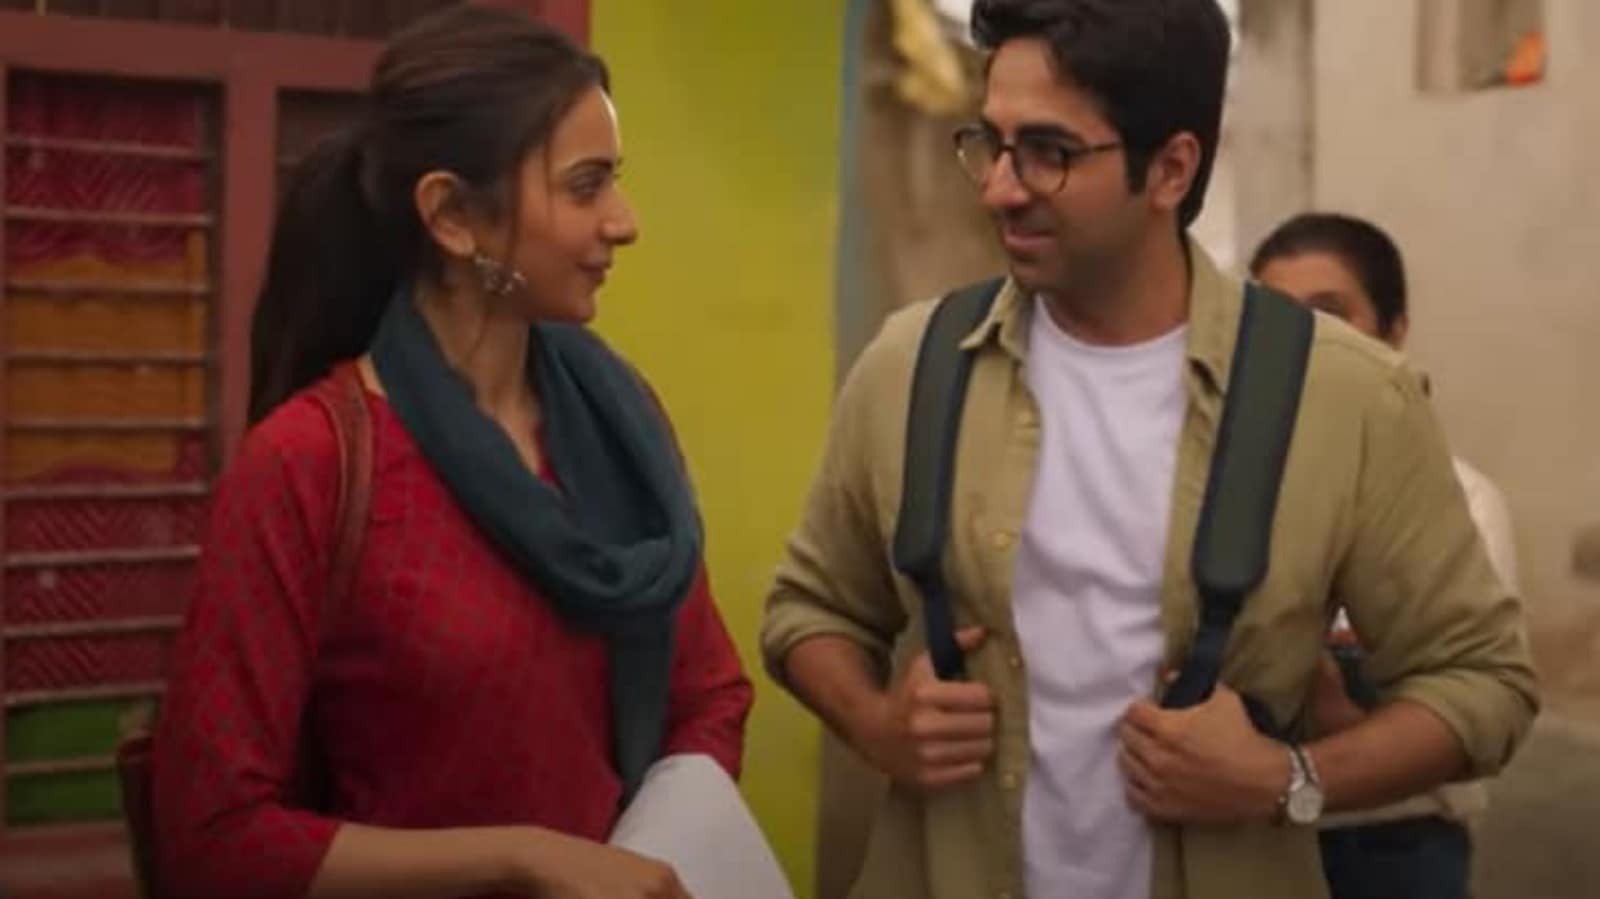 doctor-g-advance-booking-ayushmann-khurrana-film-sees-day-one-sales-of-inr50-lakh-exhibitors-feel-film-may-open-well